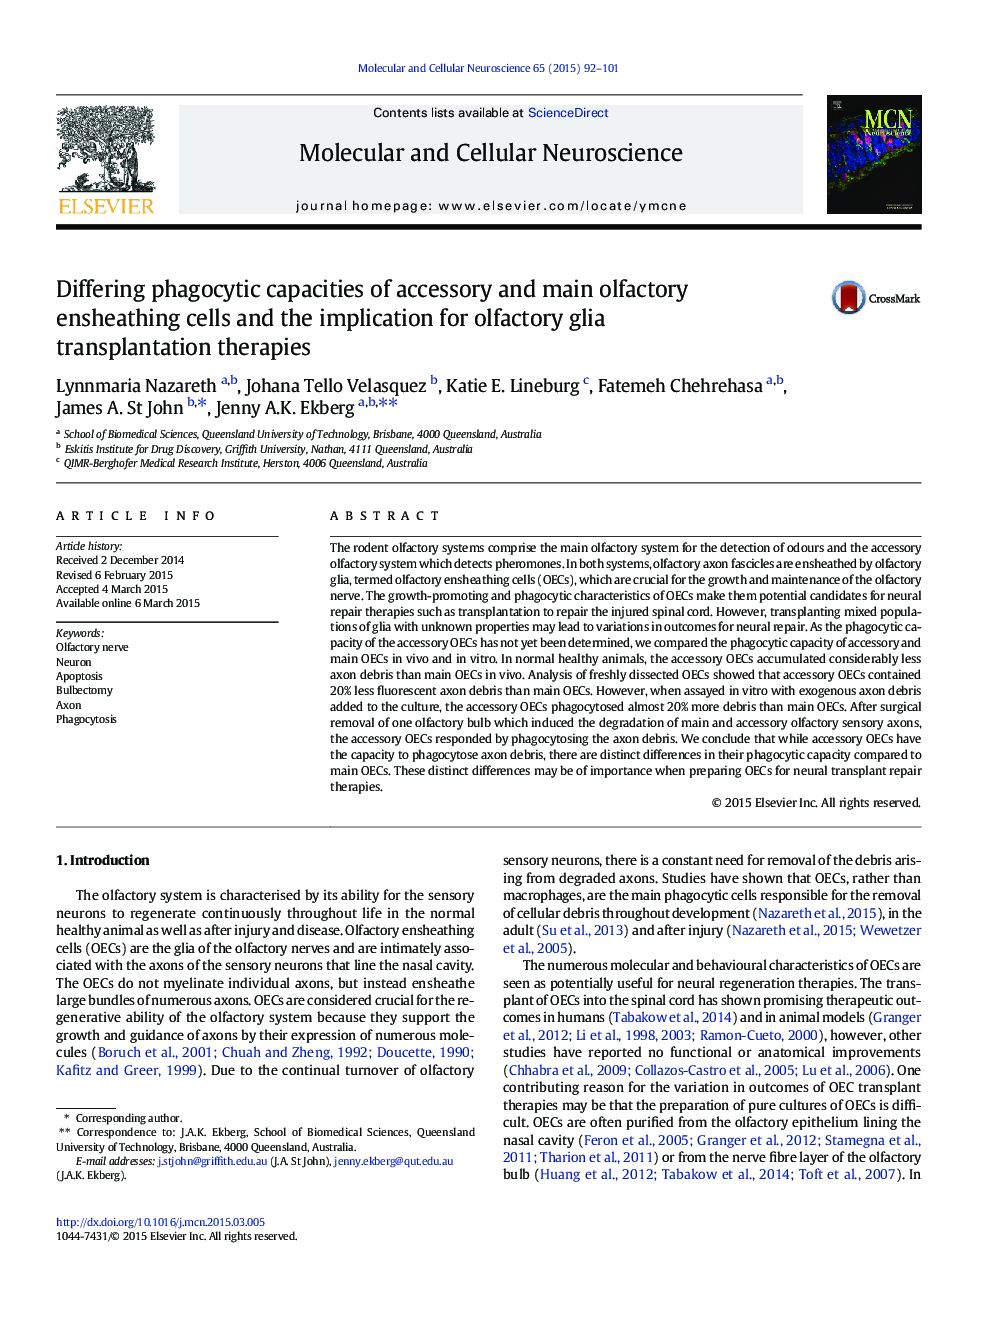 Differing phagocytic capacities of accessory and main olfactory ensheathing cells and the implication for olfactory glia transplantation therapies